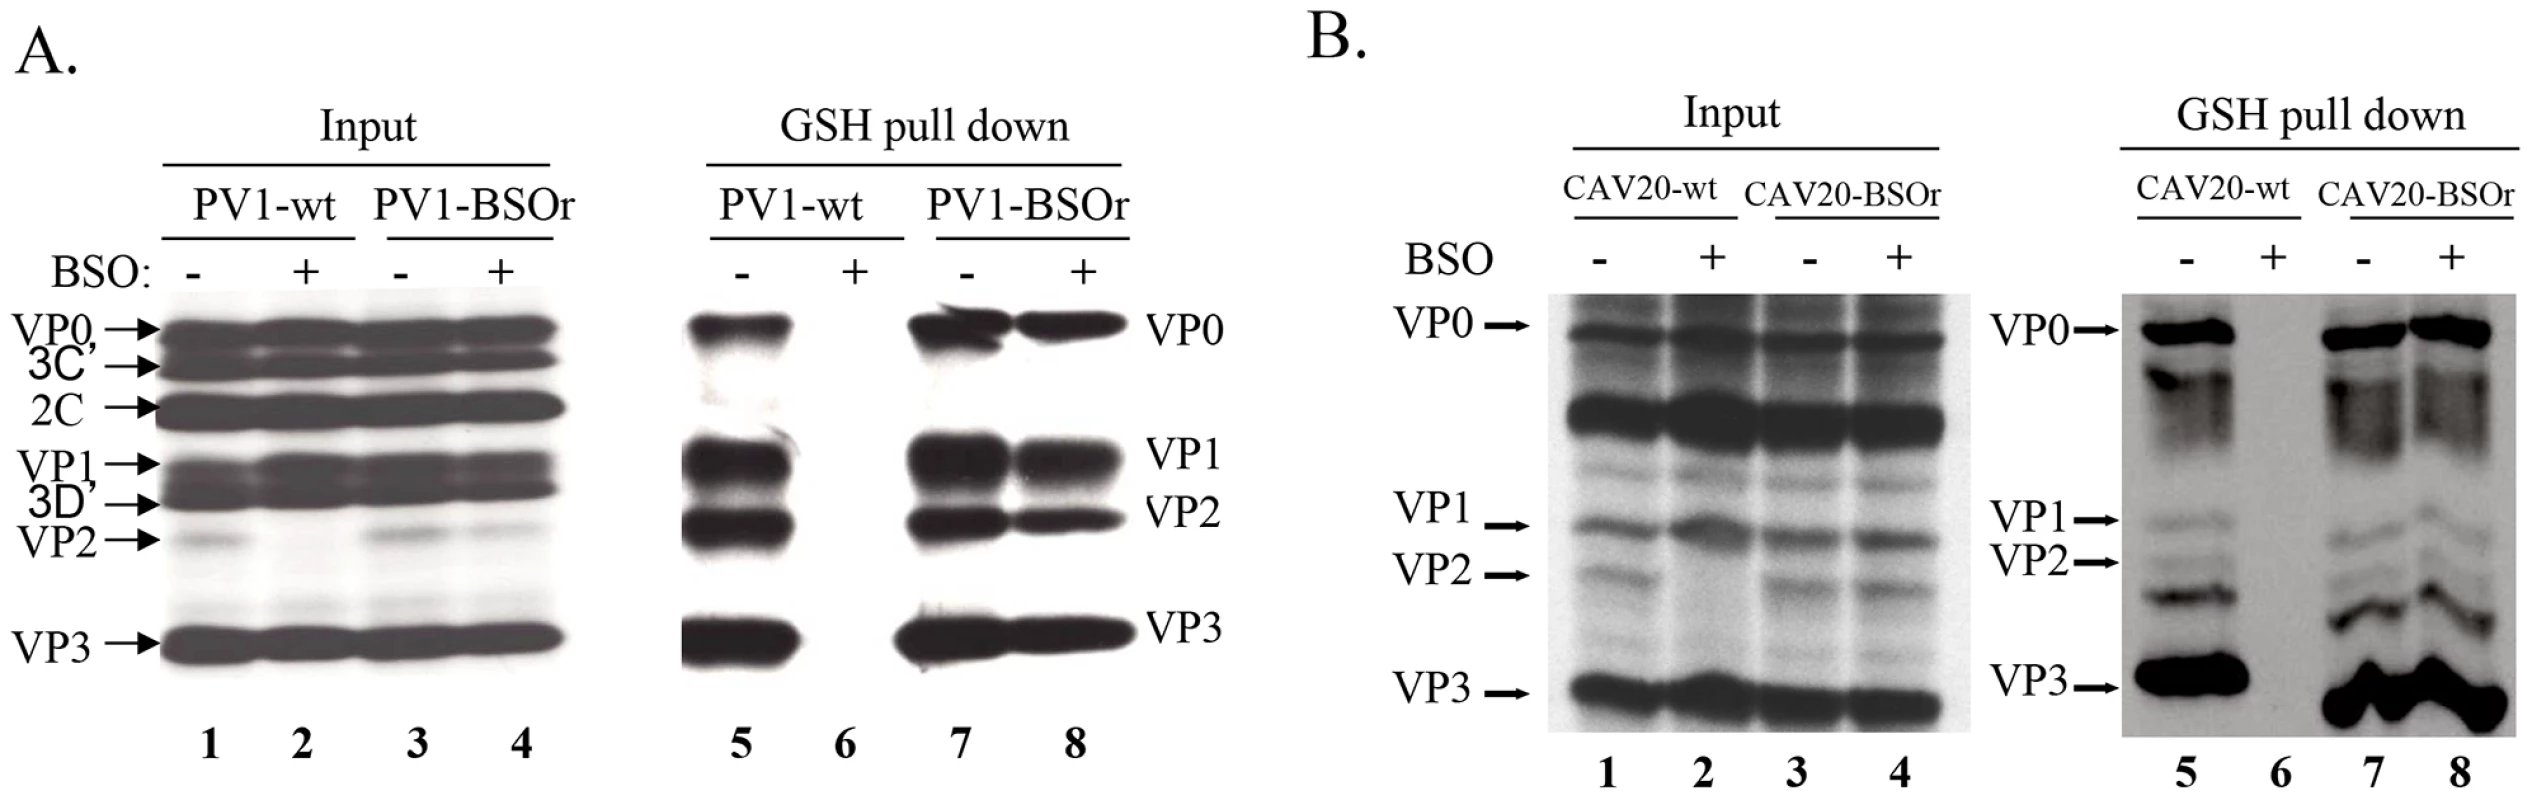 GSH directly interacts with capsid proteins of both PV1 and CAV20.